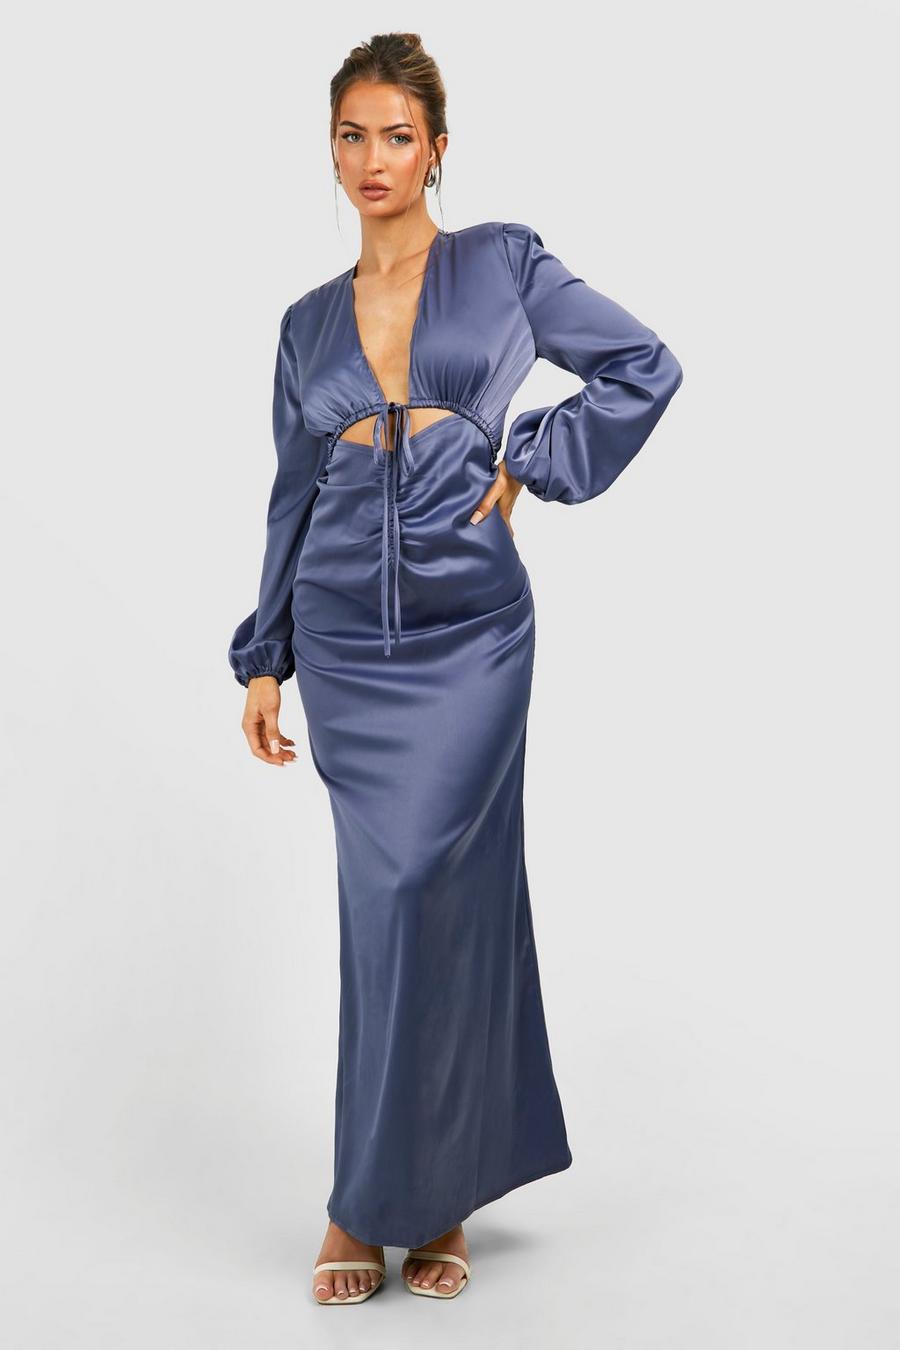 Dusty blue Satin Rouched Cut Out Maxi Dress